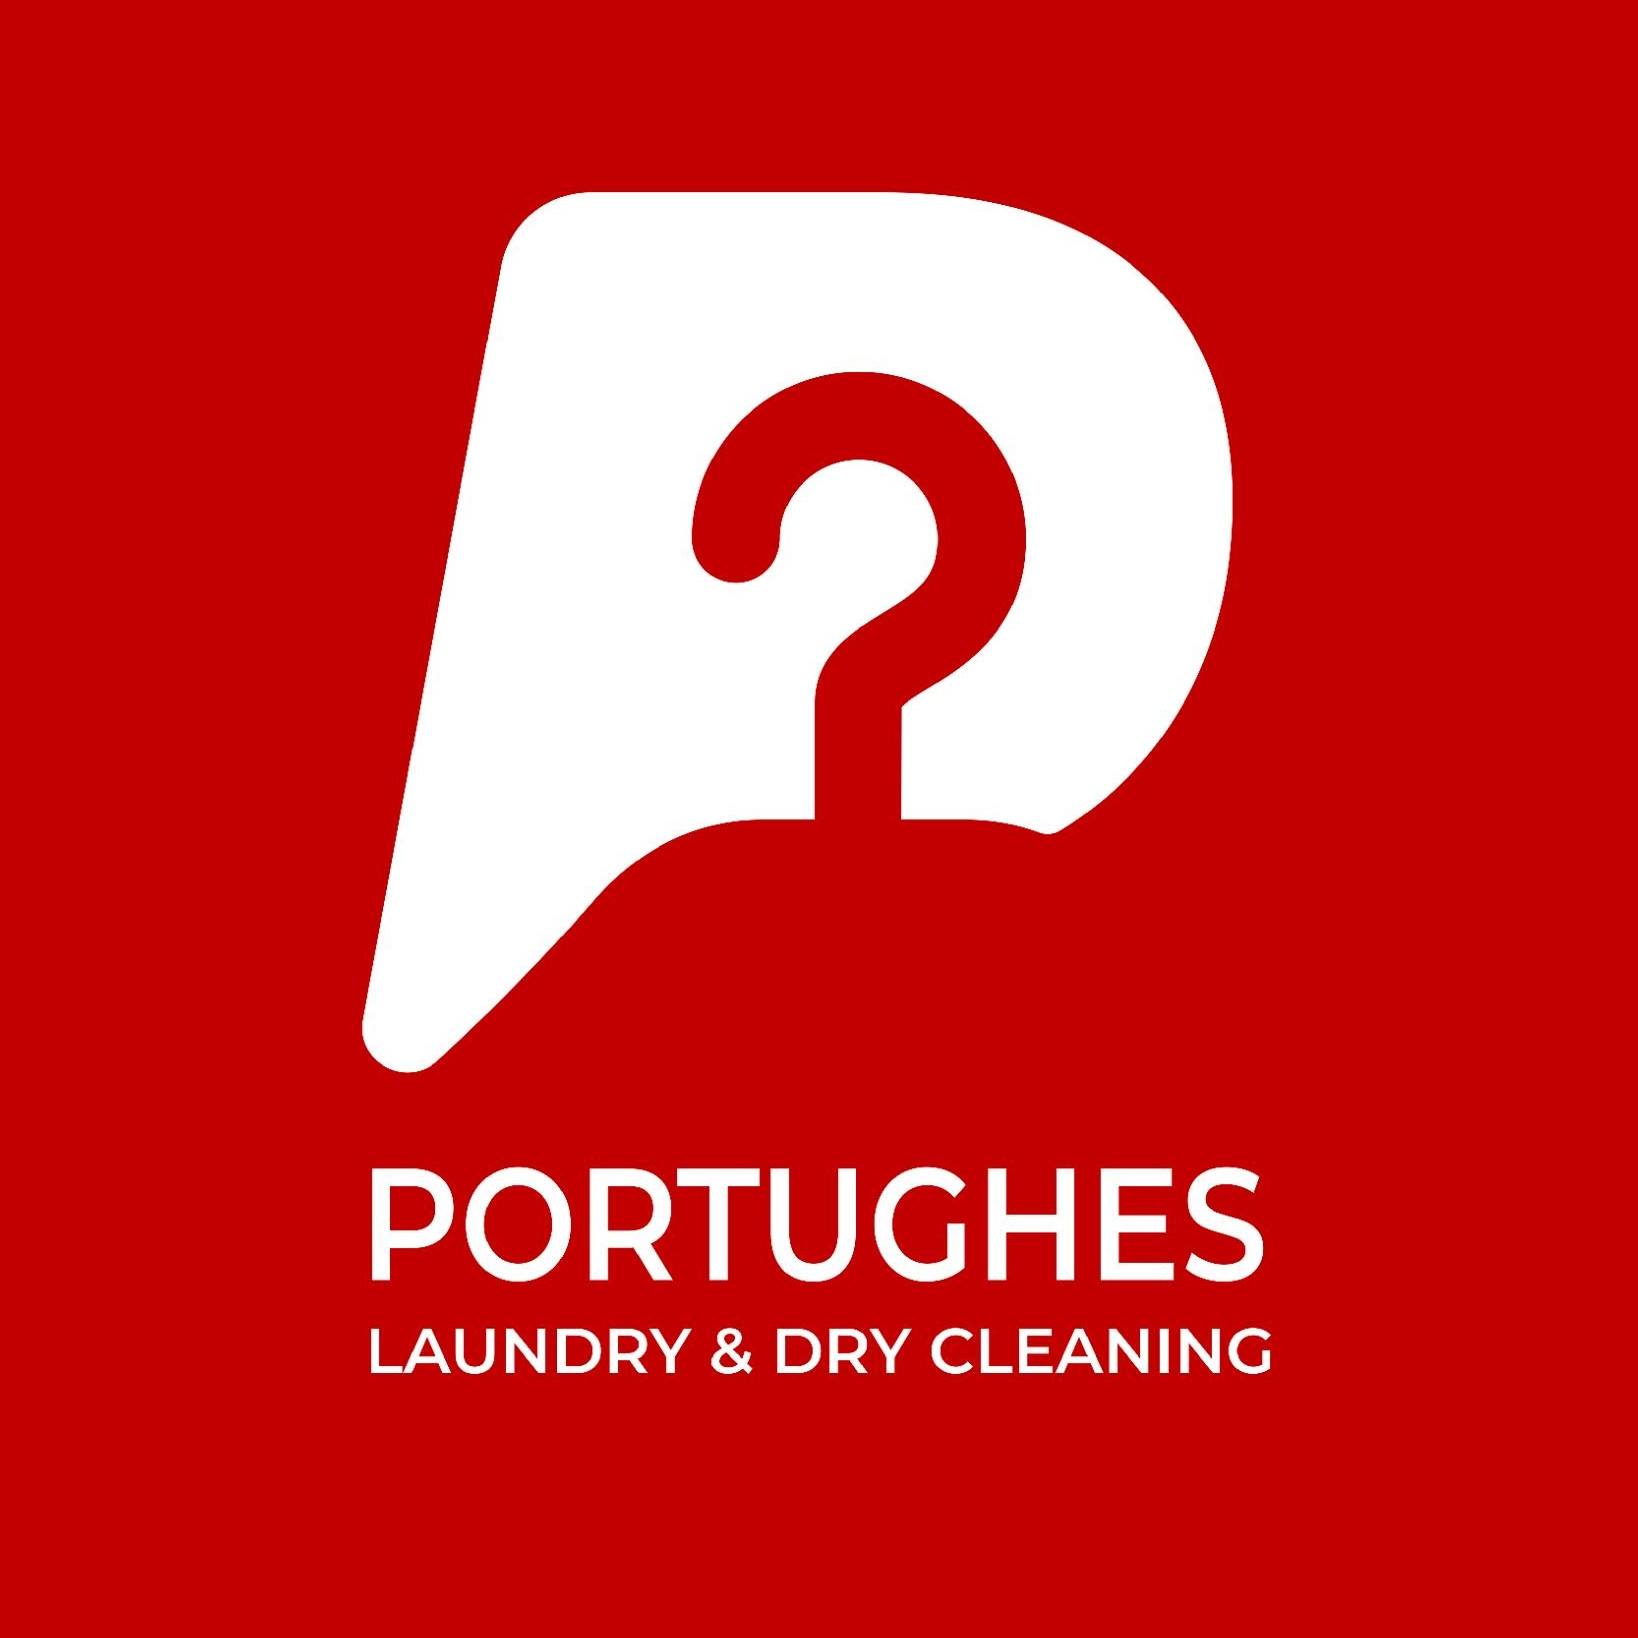 Portughes Laundry & Dry Cleaning